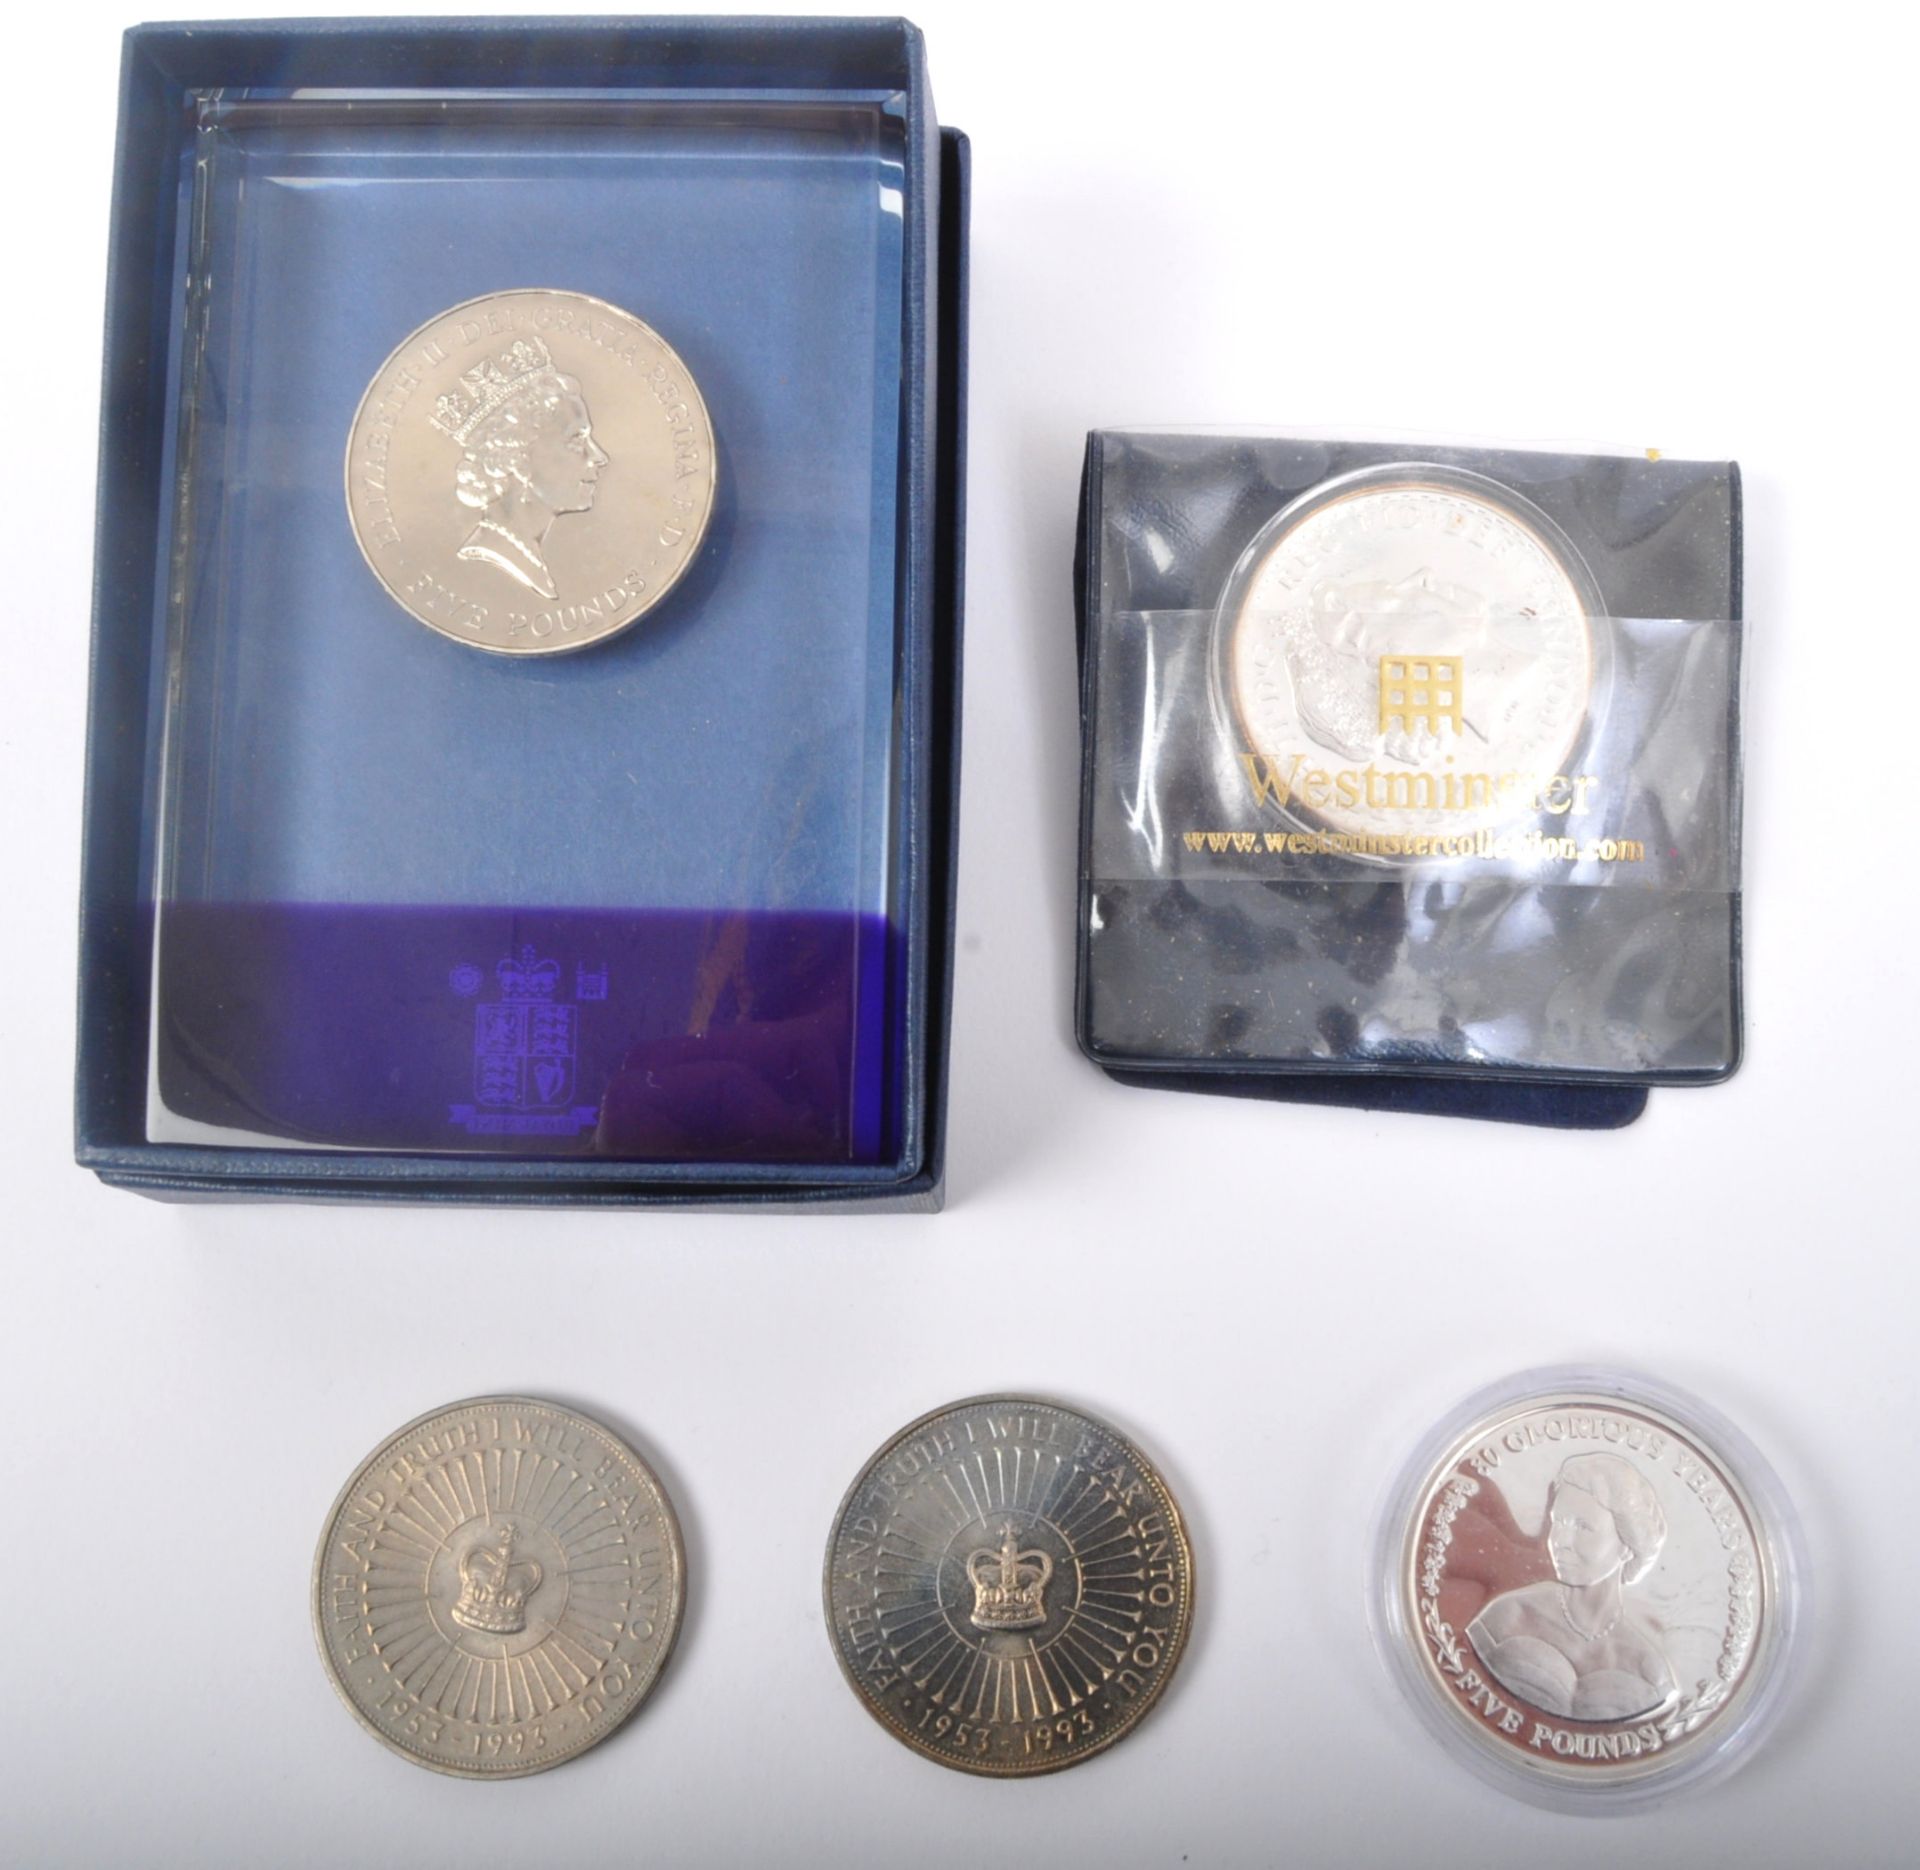 ASSORTMENT OF UK SILVER COMMEMORATIVE COINS